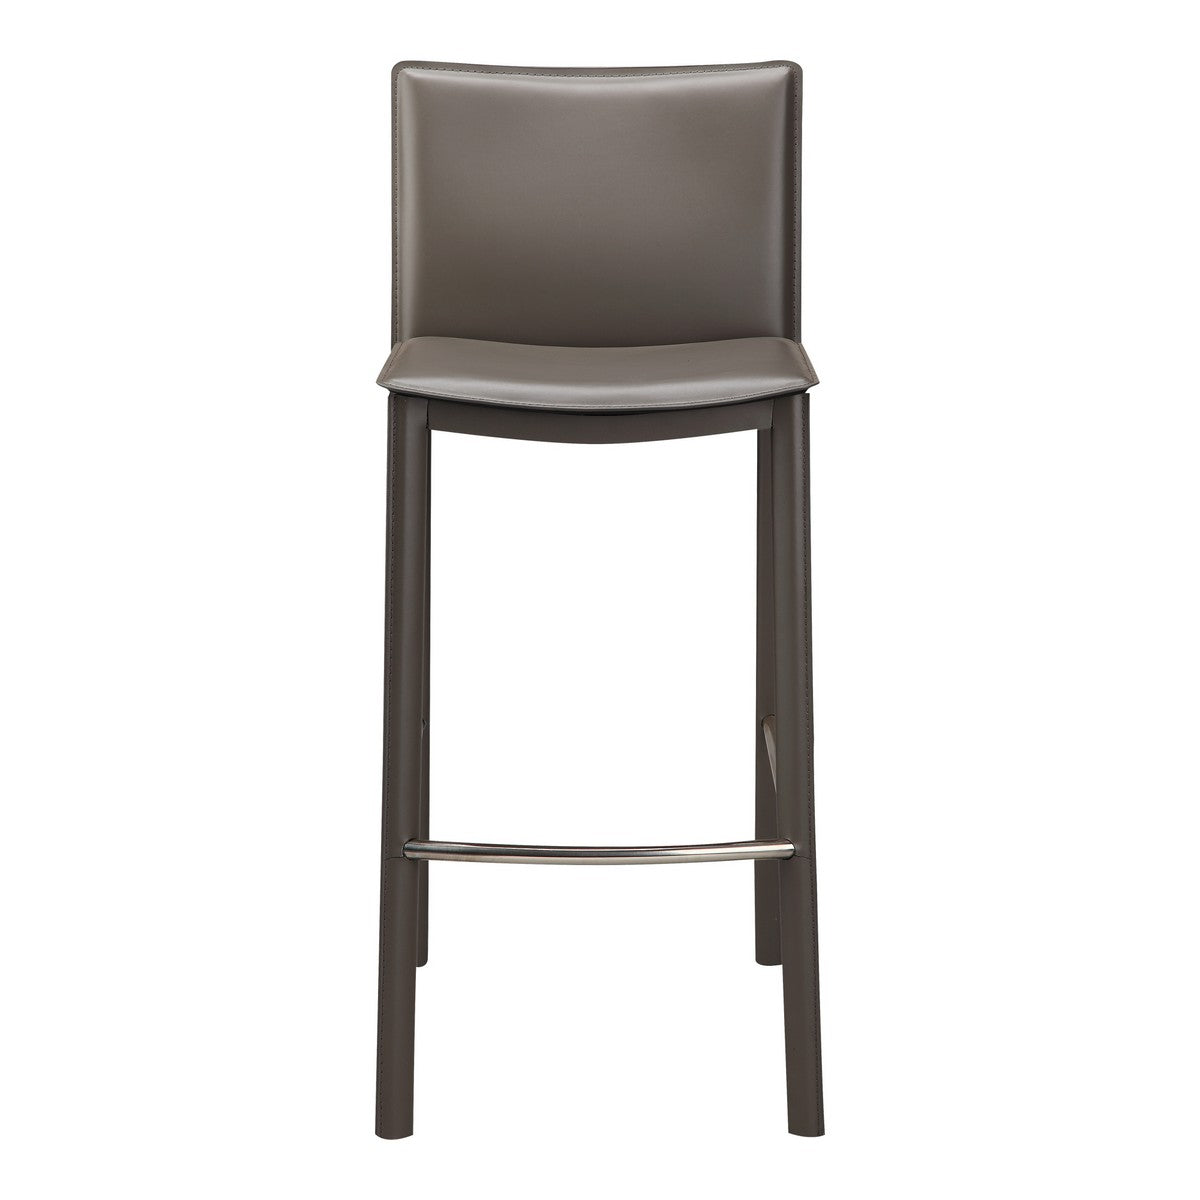 Moe's Home Collection Panca Counter Stool 26" Charcoal - EH-1034-25 - Moe's Home Collection - Counter Stools - Minimal And Modern - 1